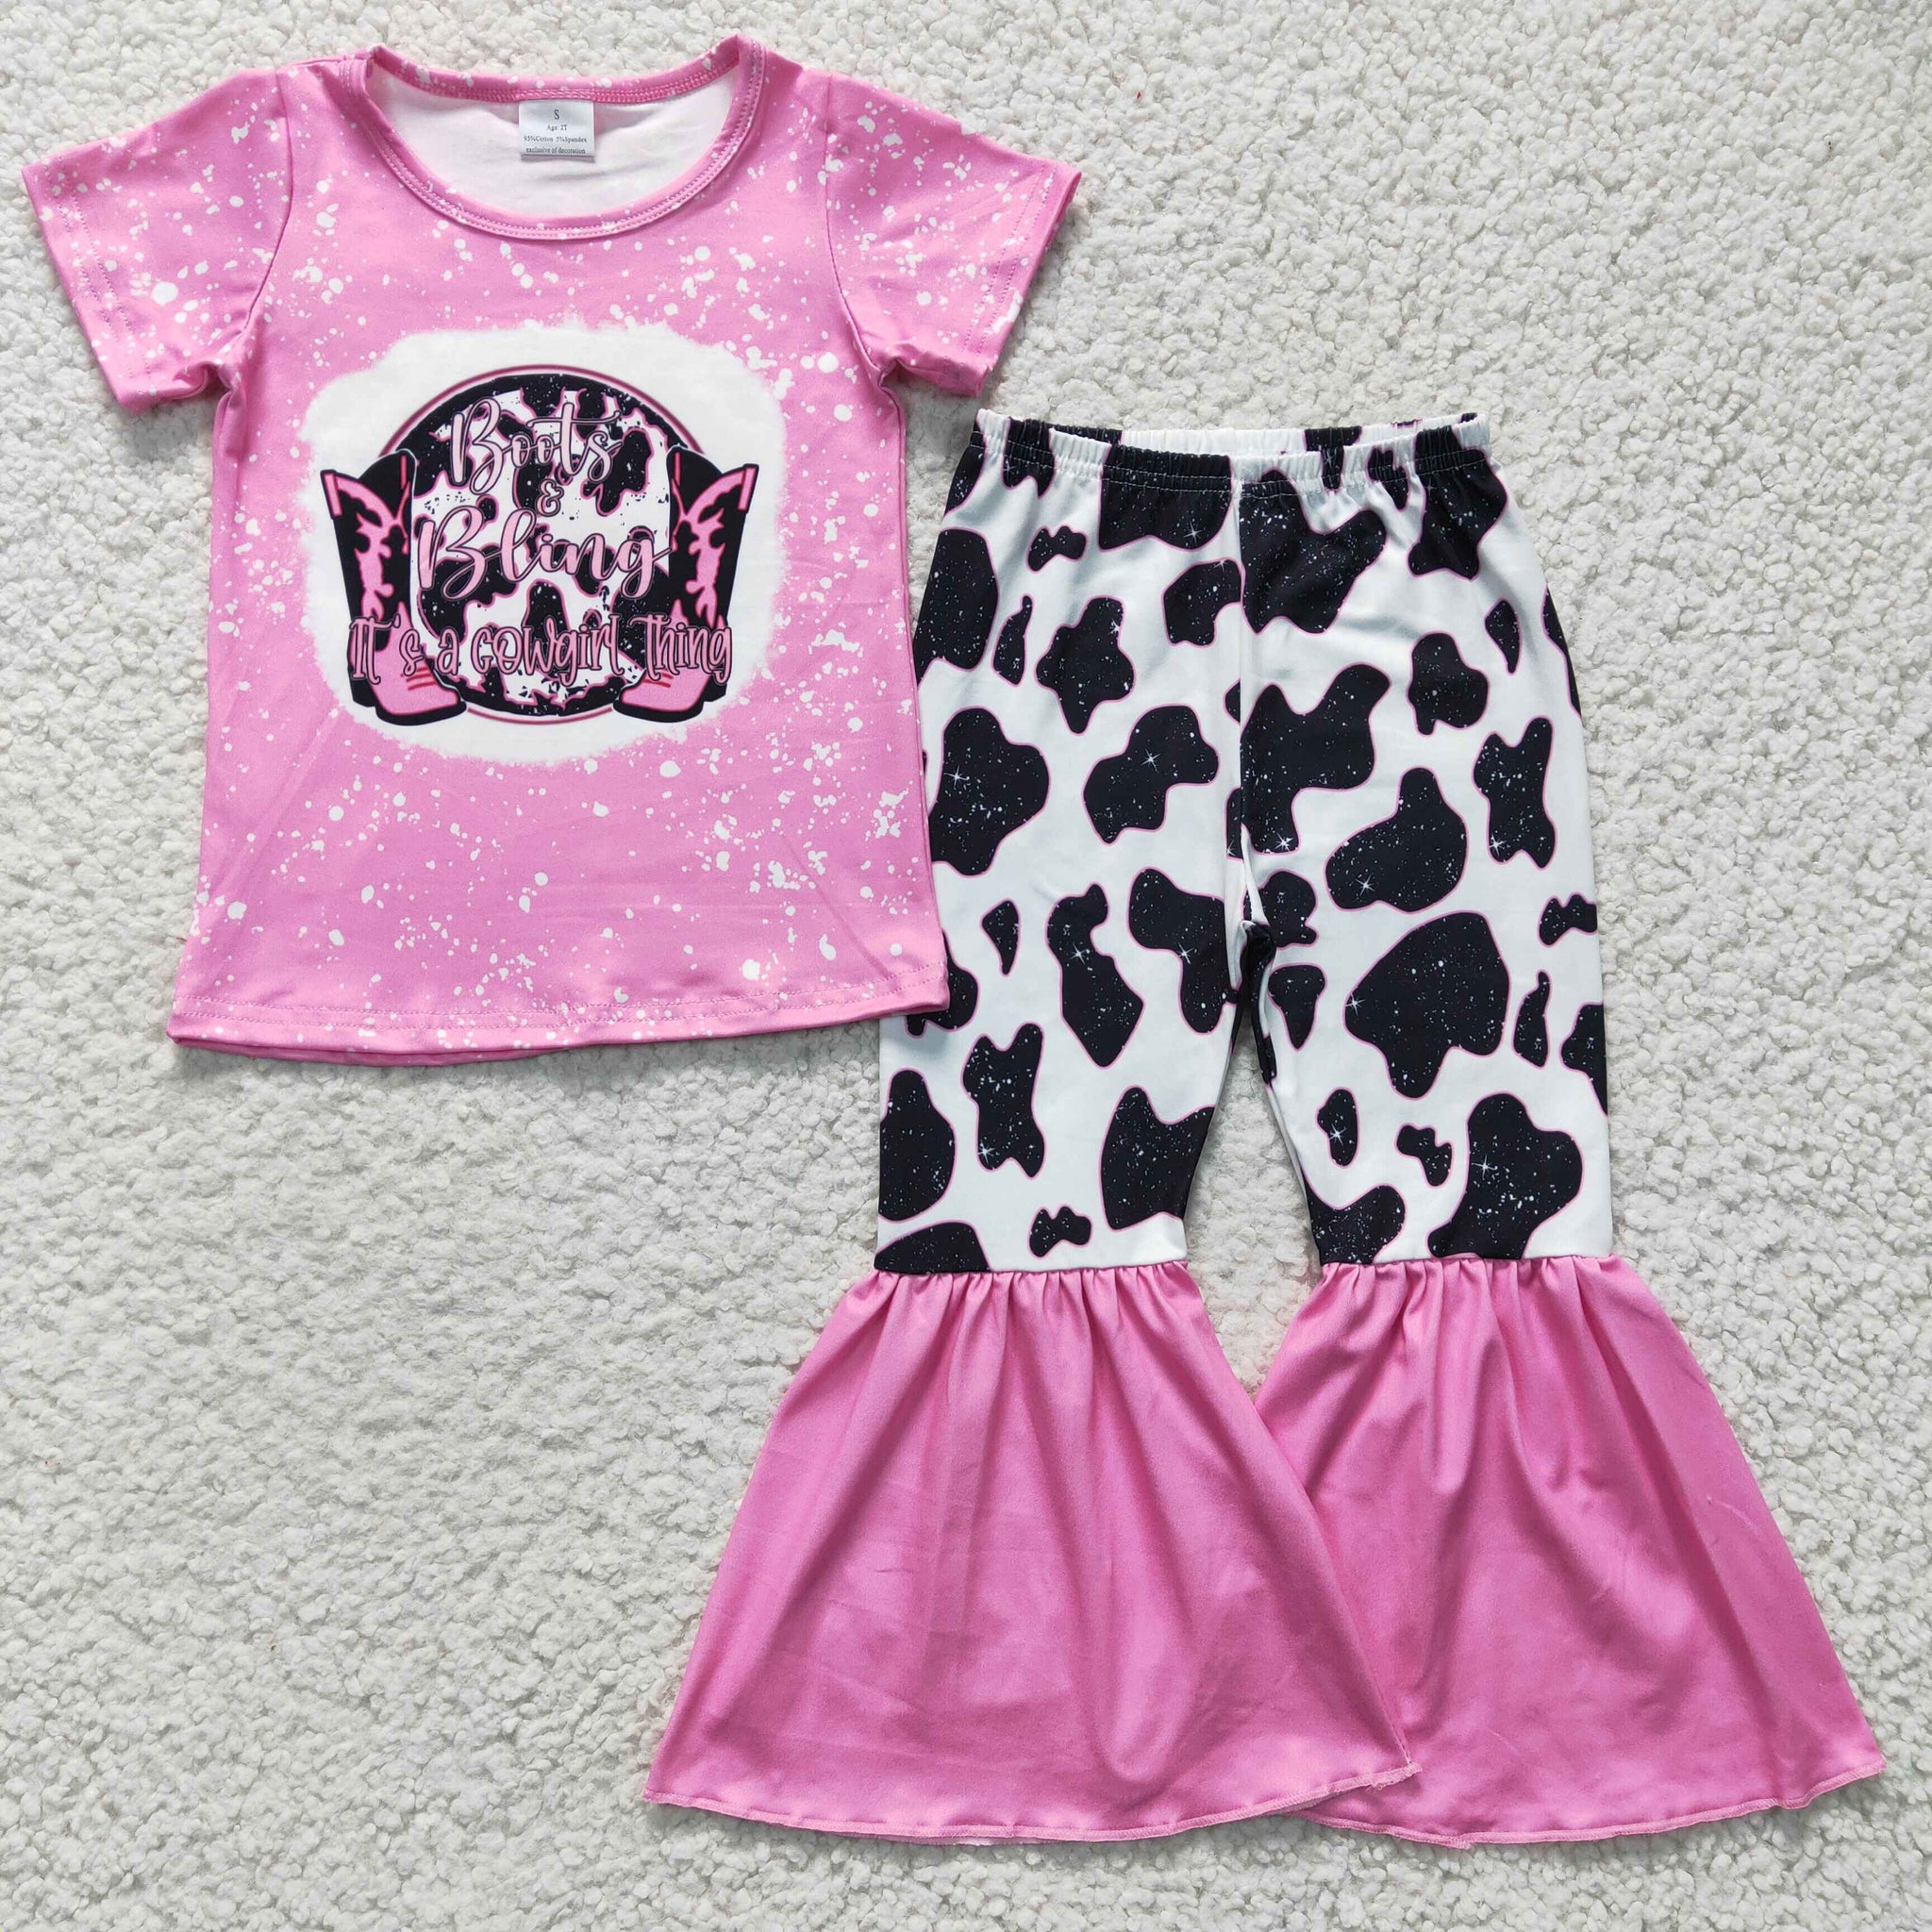 GSPO0325 kids clothes girls pink boots fall spring outfits